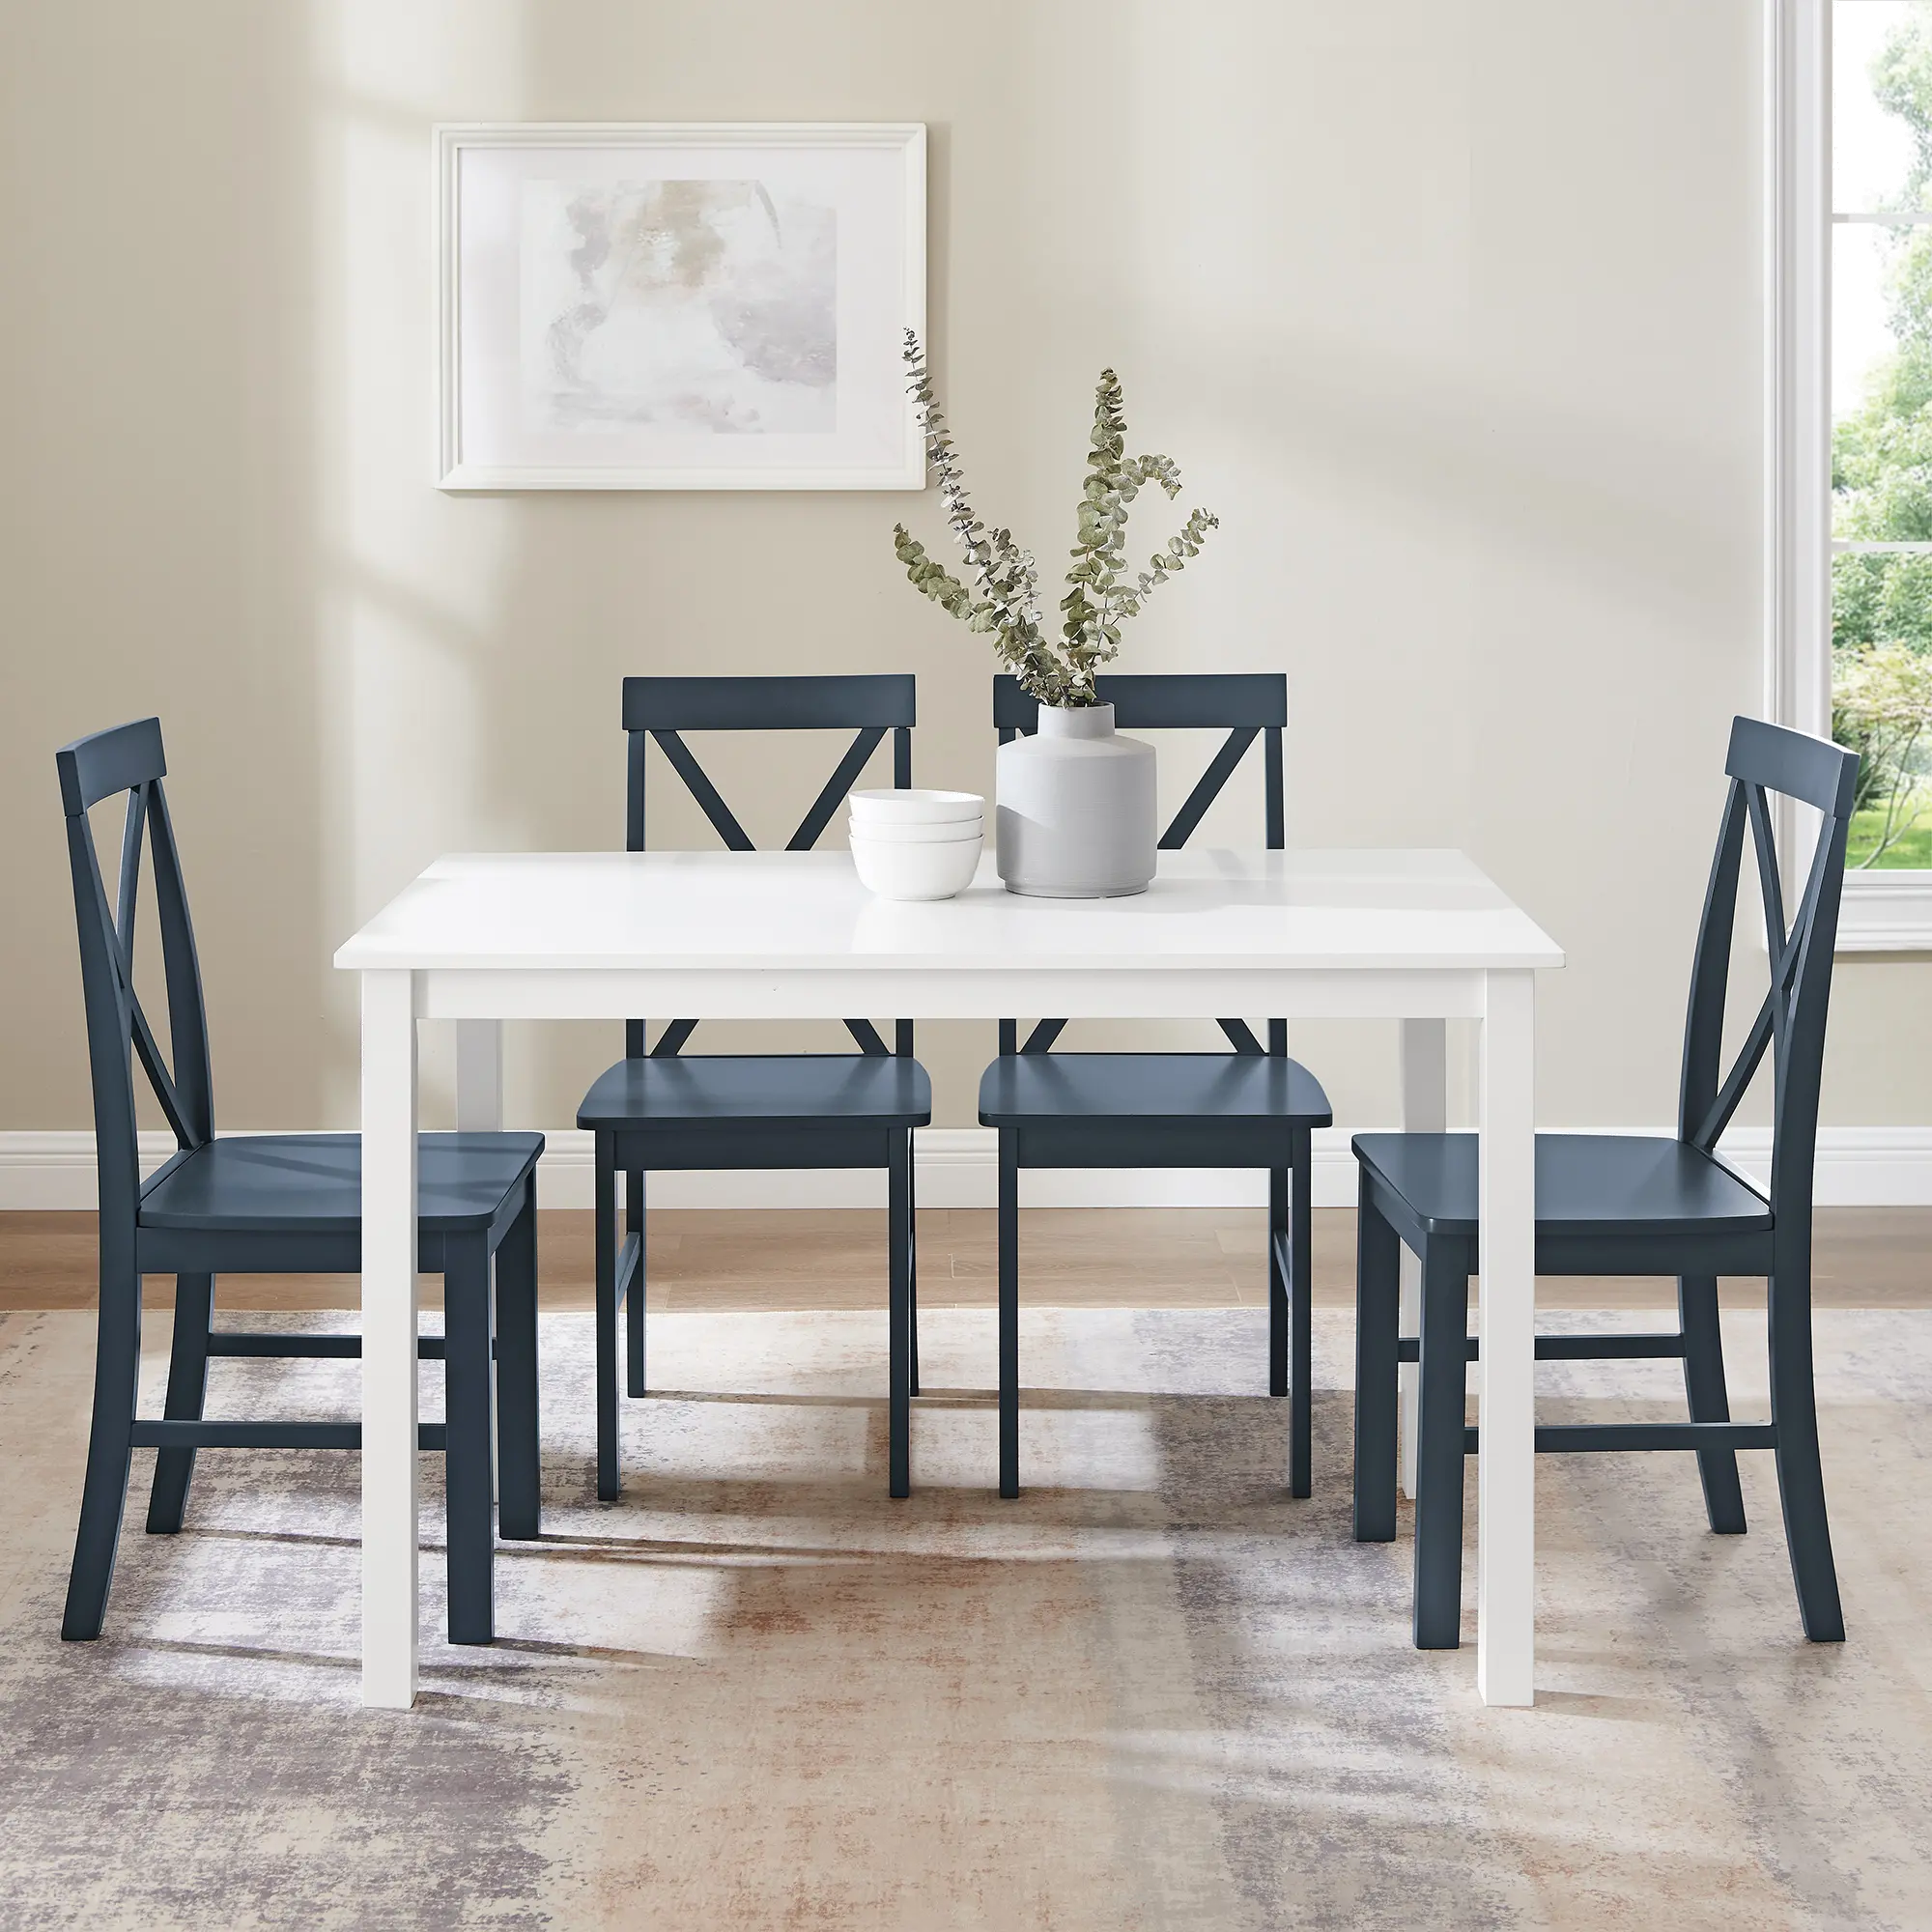 McHale White and Navy 5 Piece Dining Room Set - Walker Edison